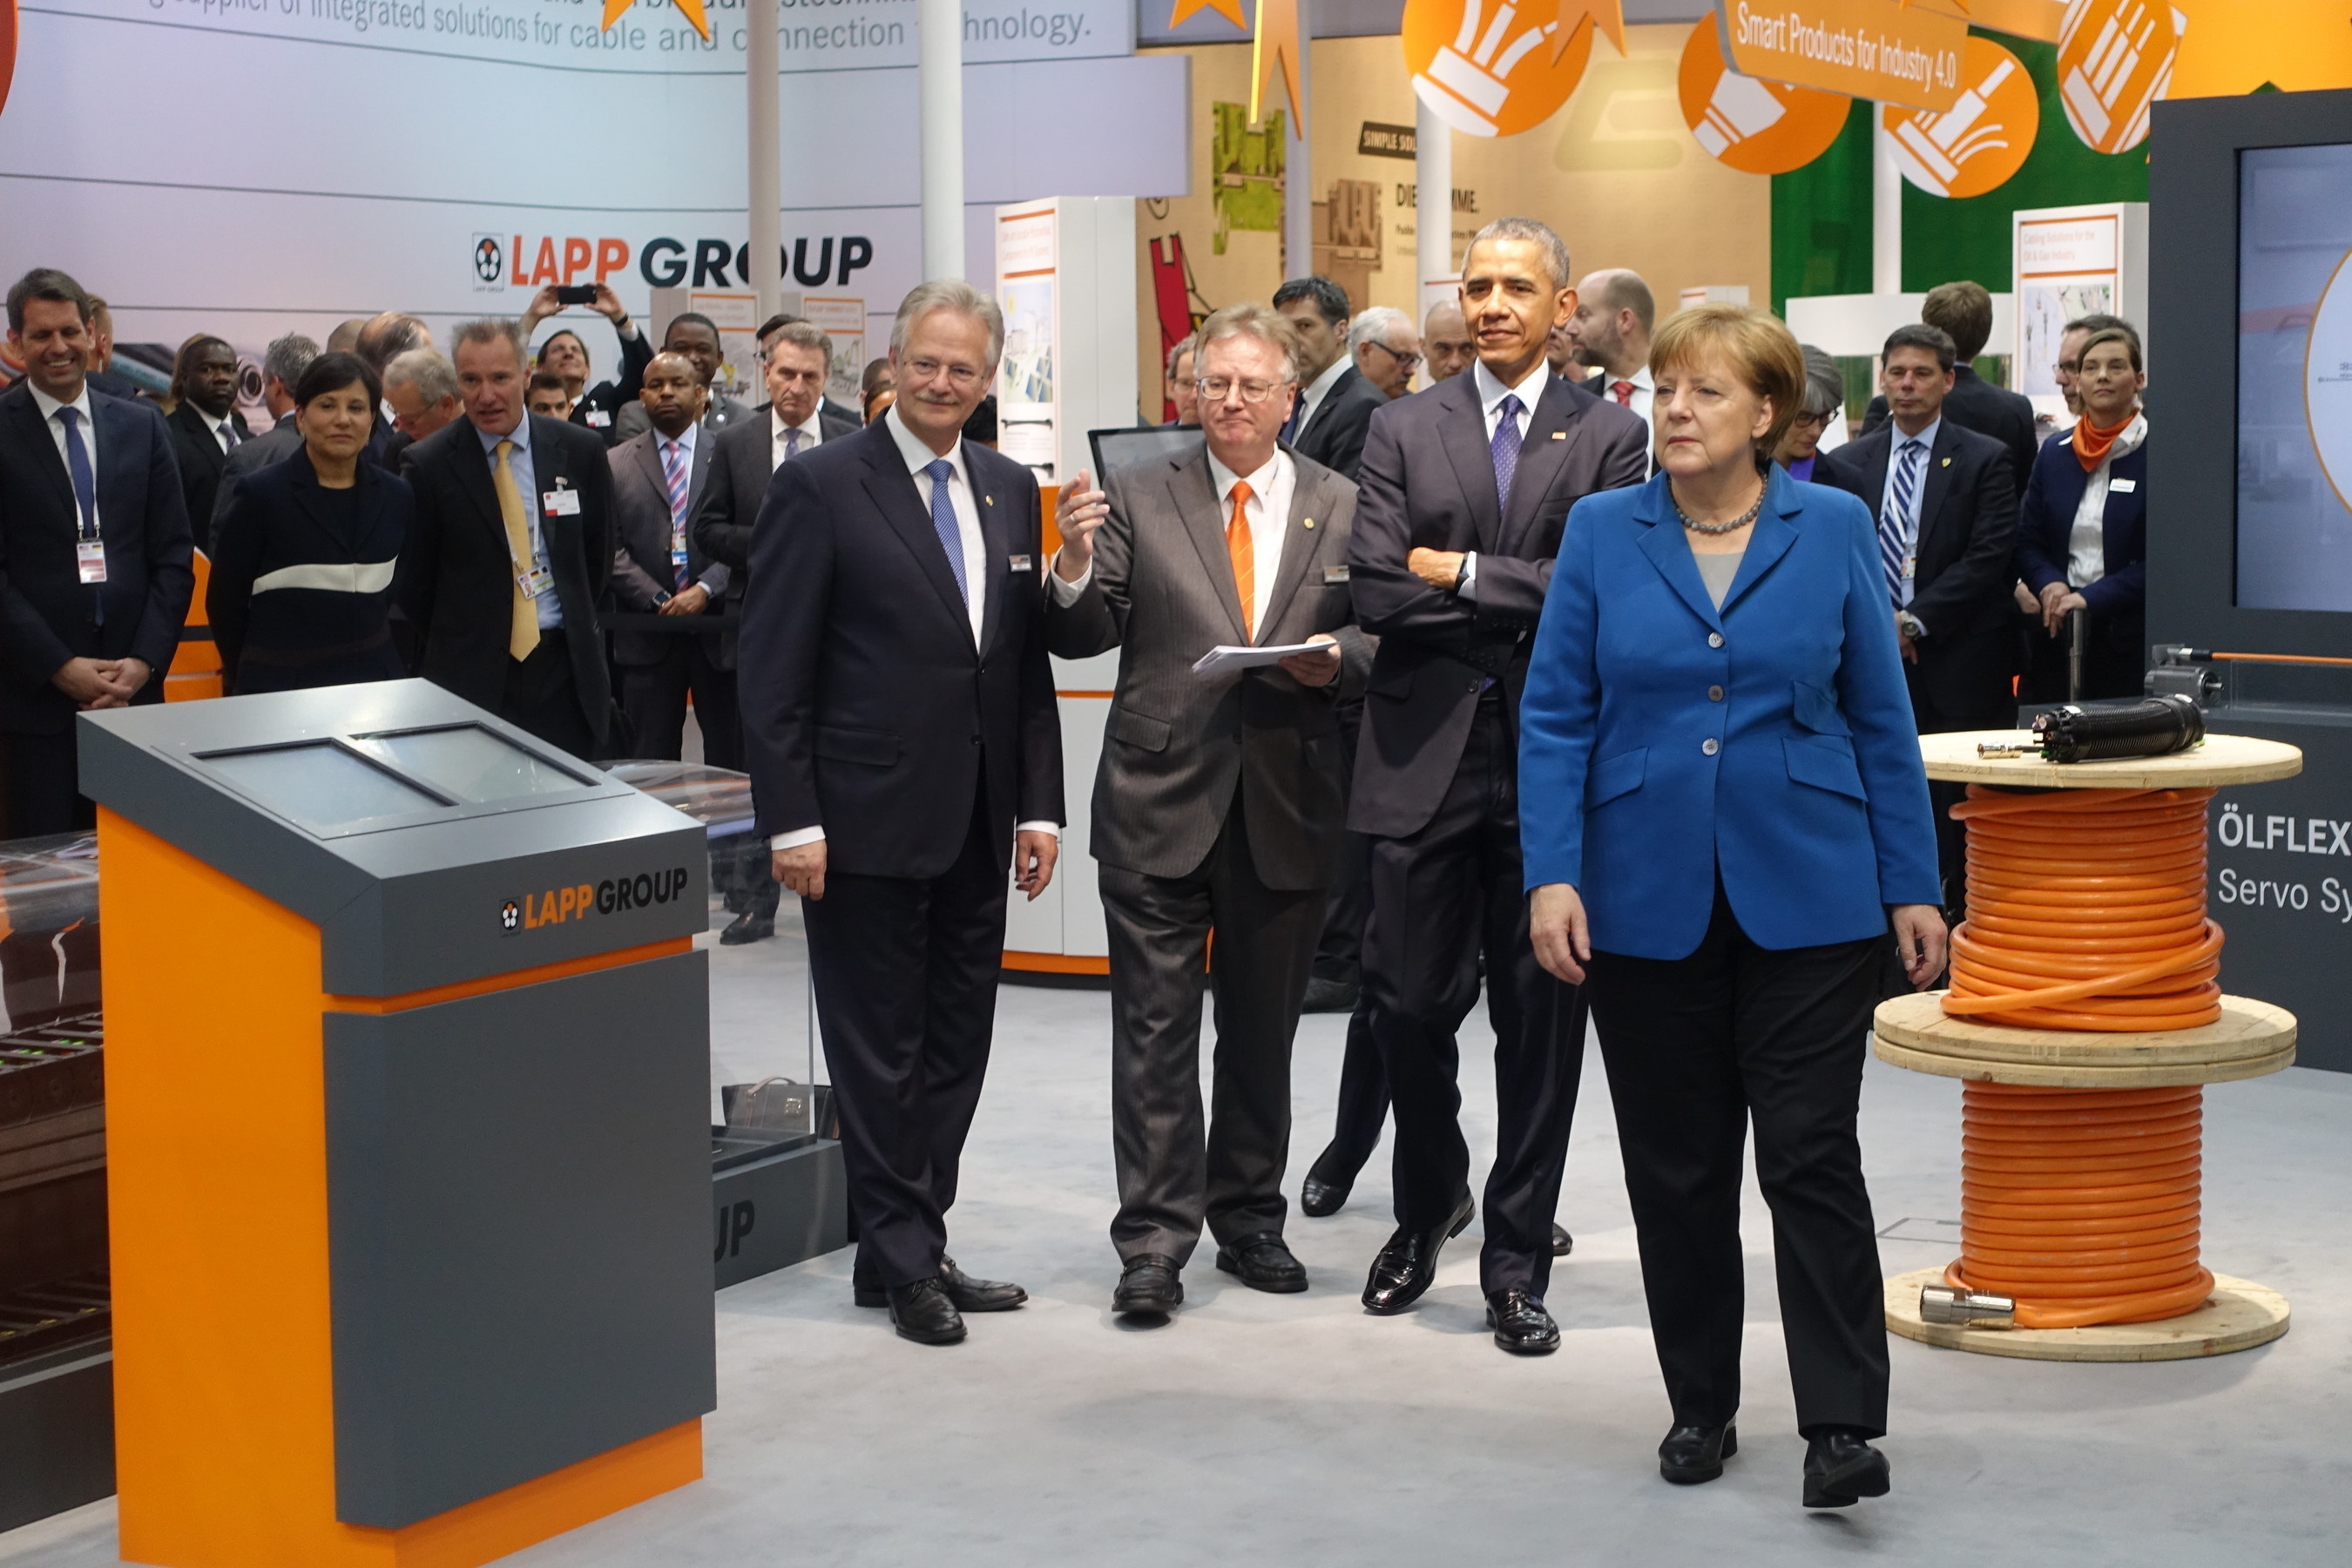 Andreas Lapp and Siegbert Lapp of the Lapp Group meet President Barack Obama and Chancellor Angela Merkel at the Hannover trade fair for industrial technology.